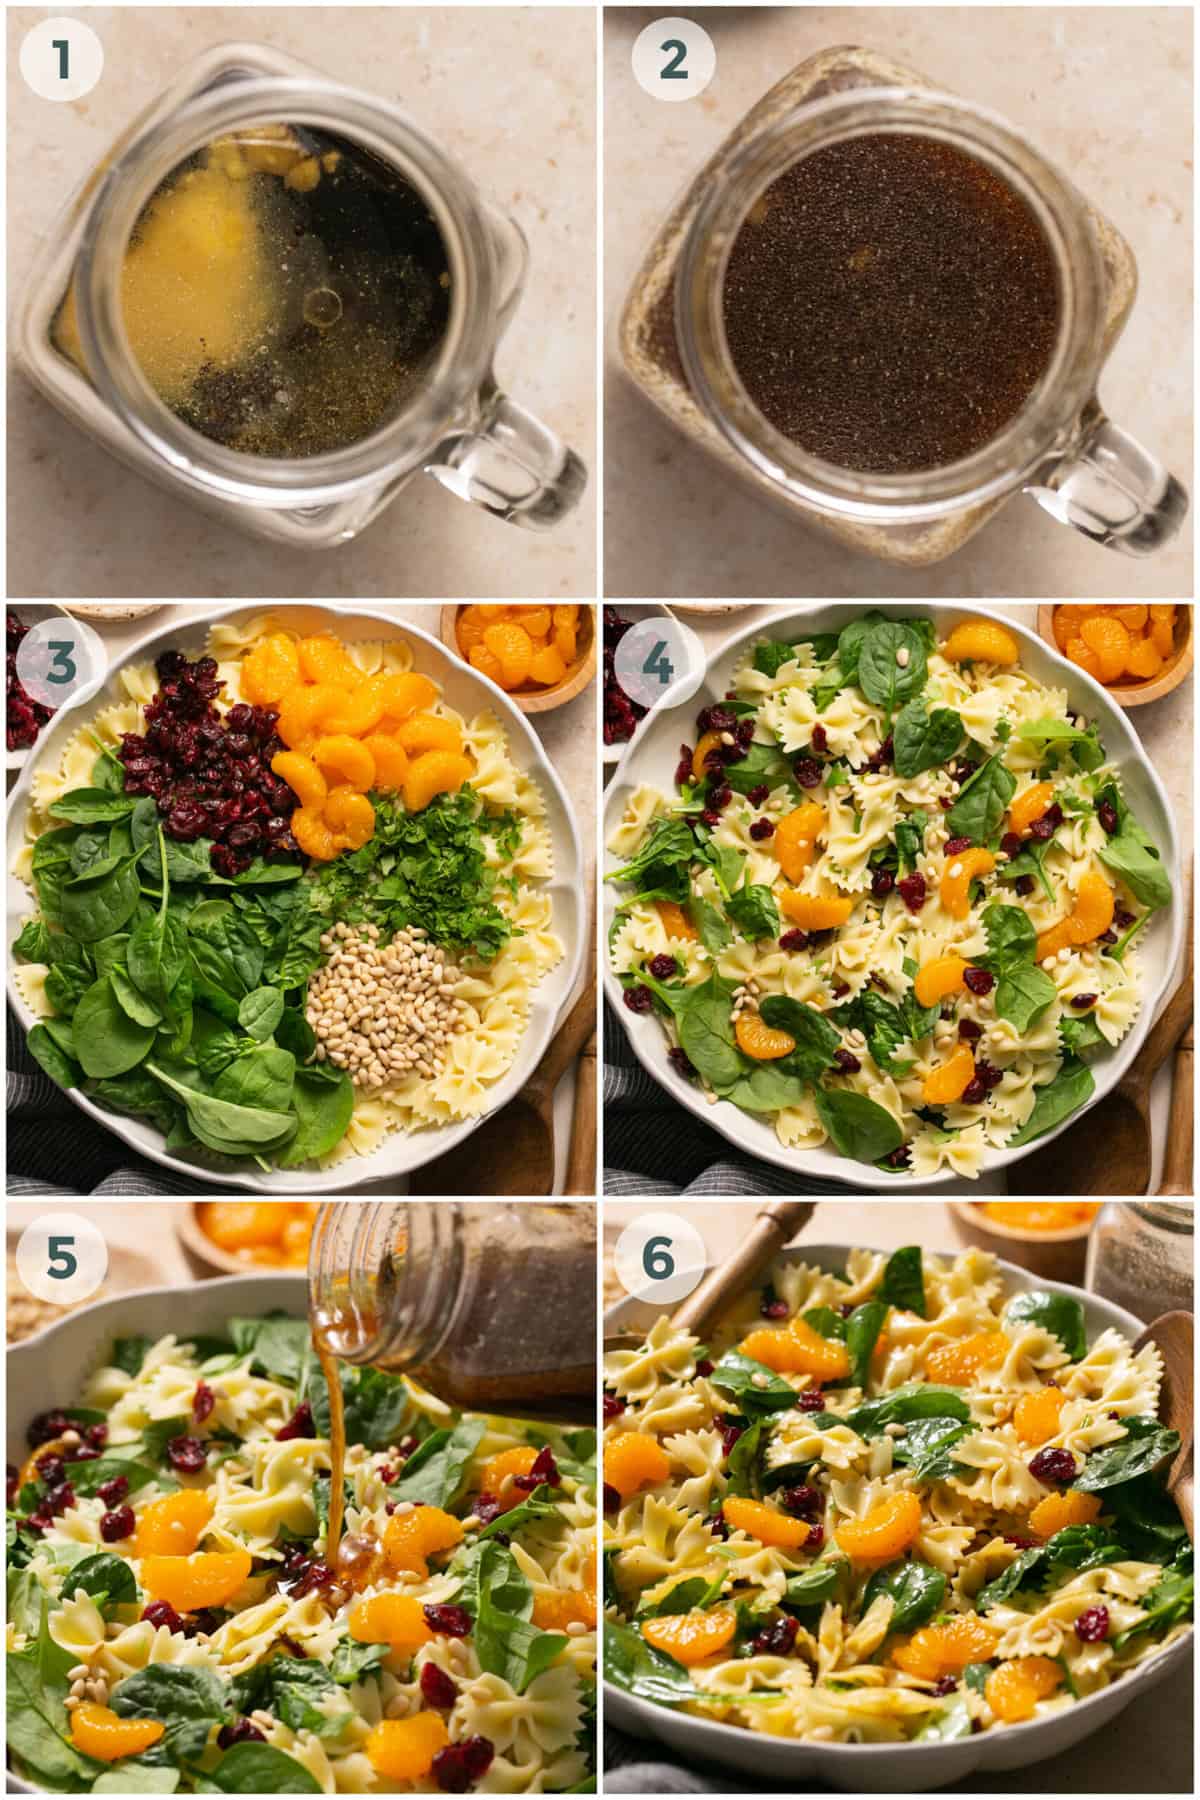 6 steps of preparing spinach salad with mandarin oranges and pasta noodles